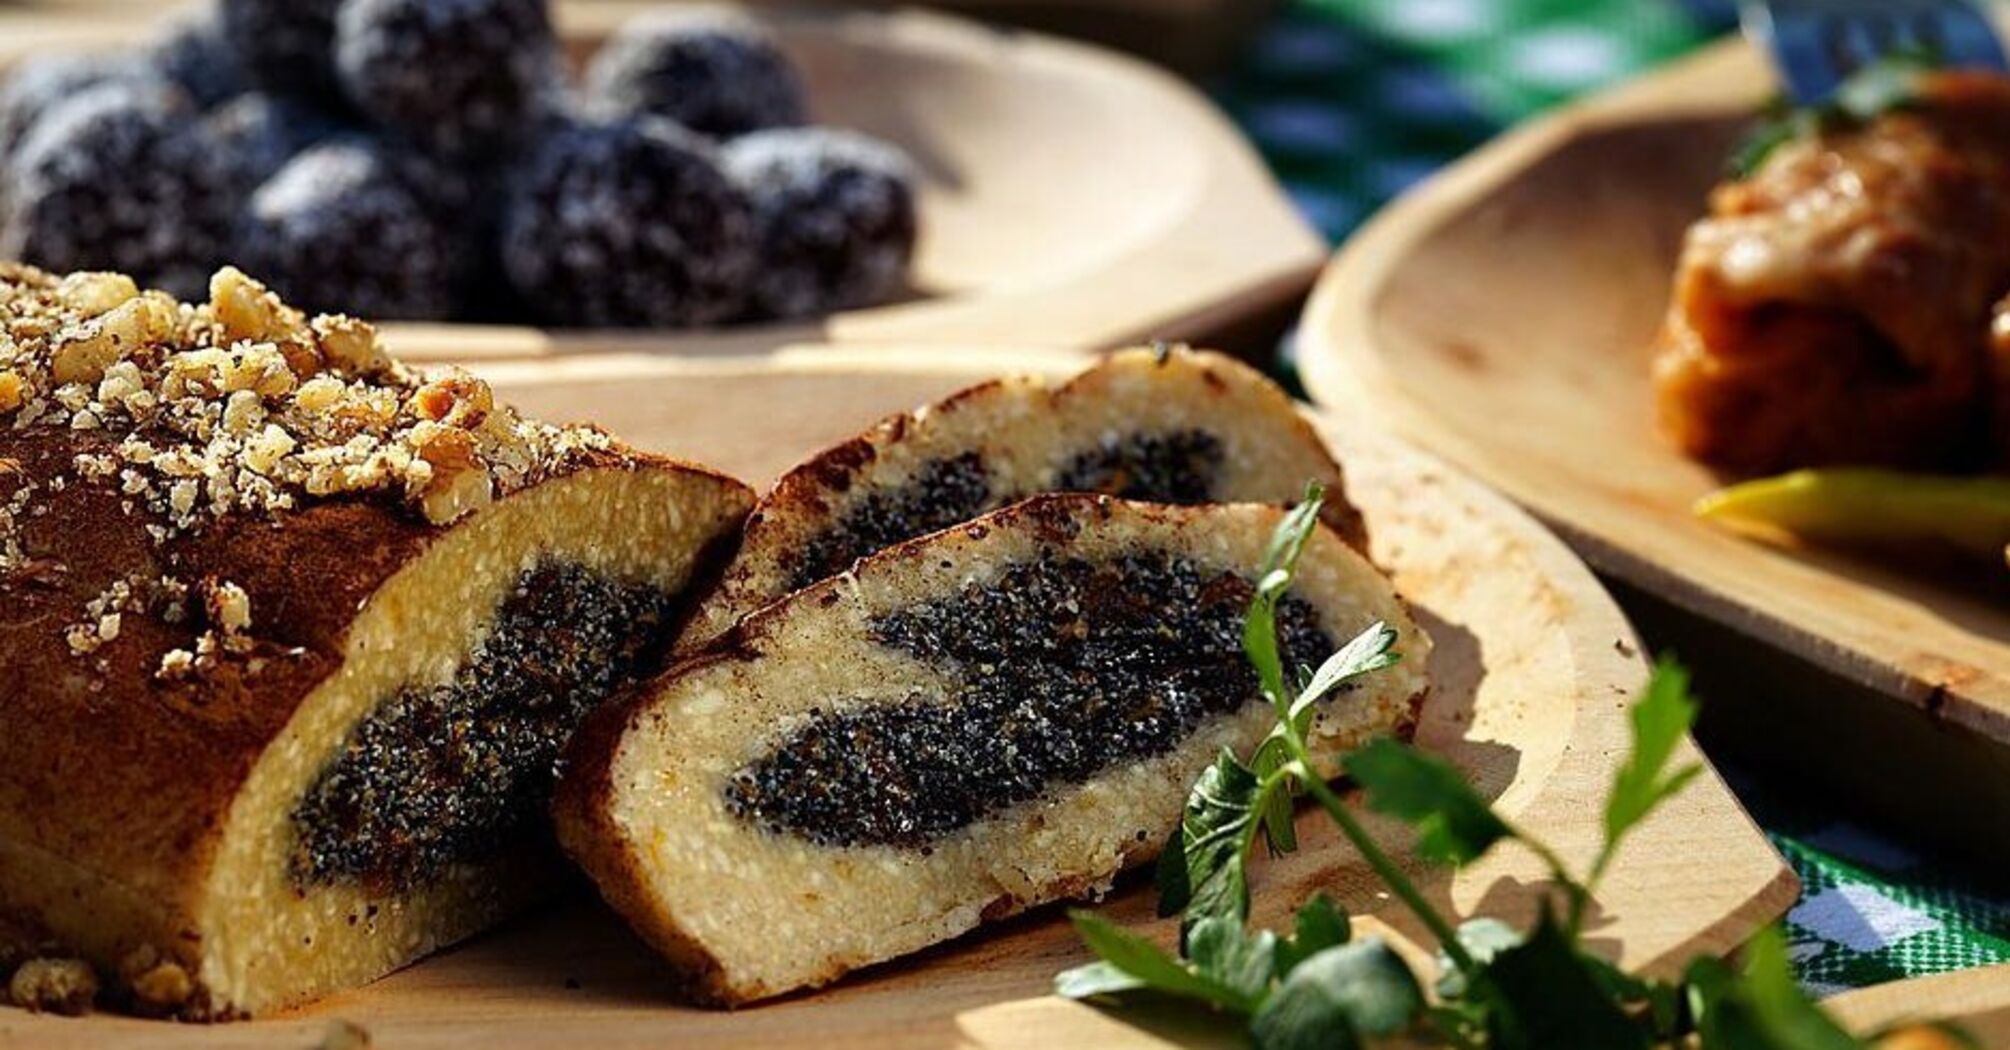 Tender roll with juicy poppy seed filling: how to make the dough